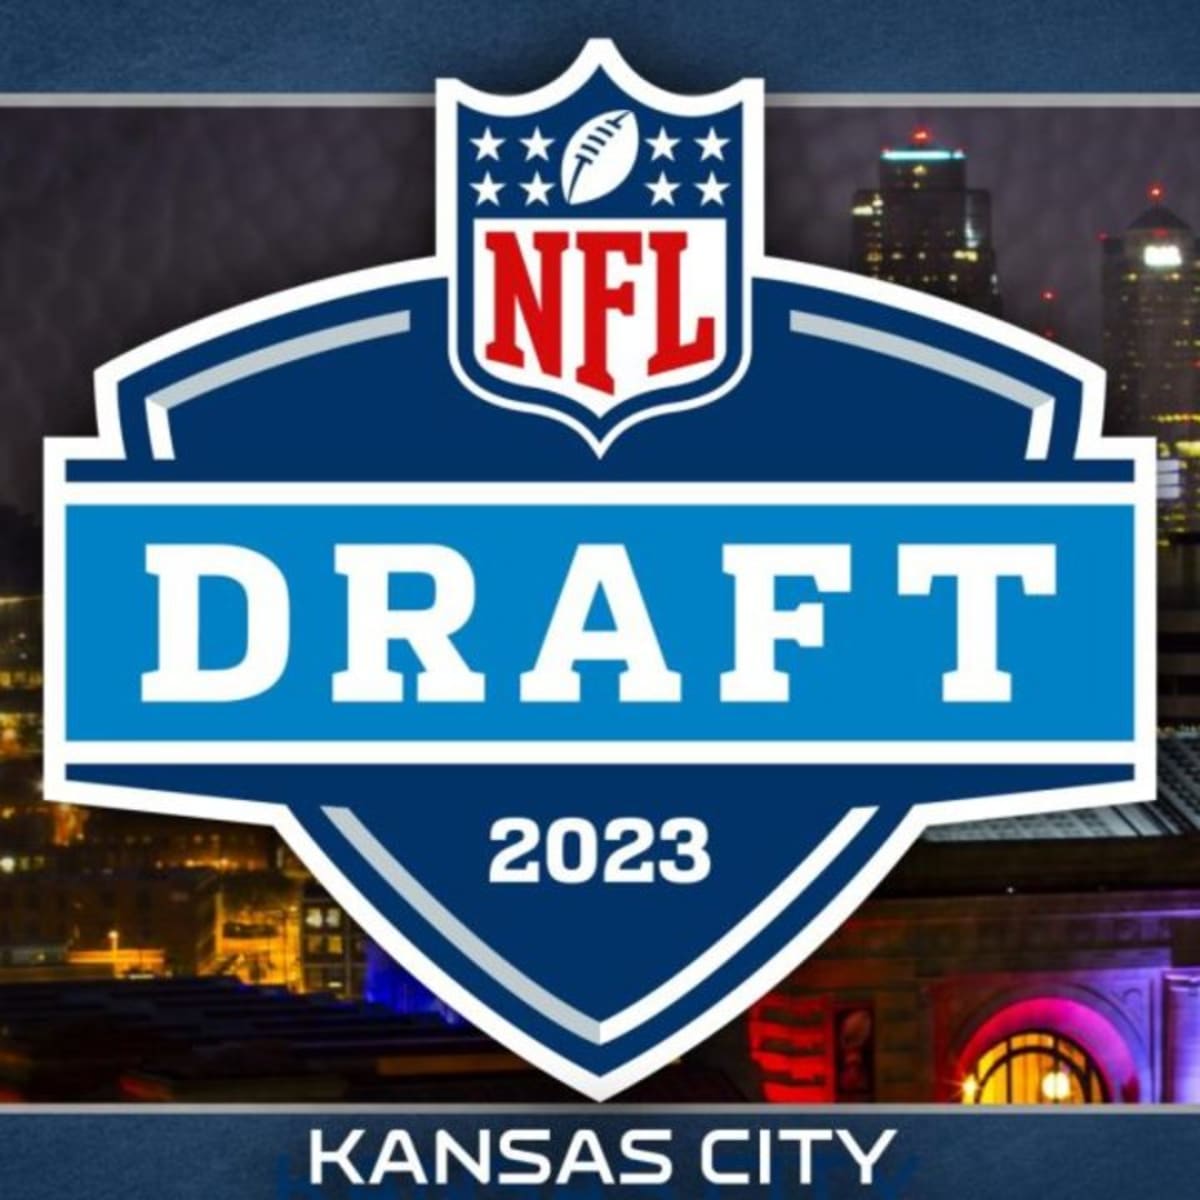 How to Watch: NFL Football Games Today - Sunday 11/28 - Visit NFL Draft on  Sports Illustrated, the latest news coverage, with rankings for NFL Draft  prospects, College Football, Dynasty and Devy Fantasy Football.